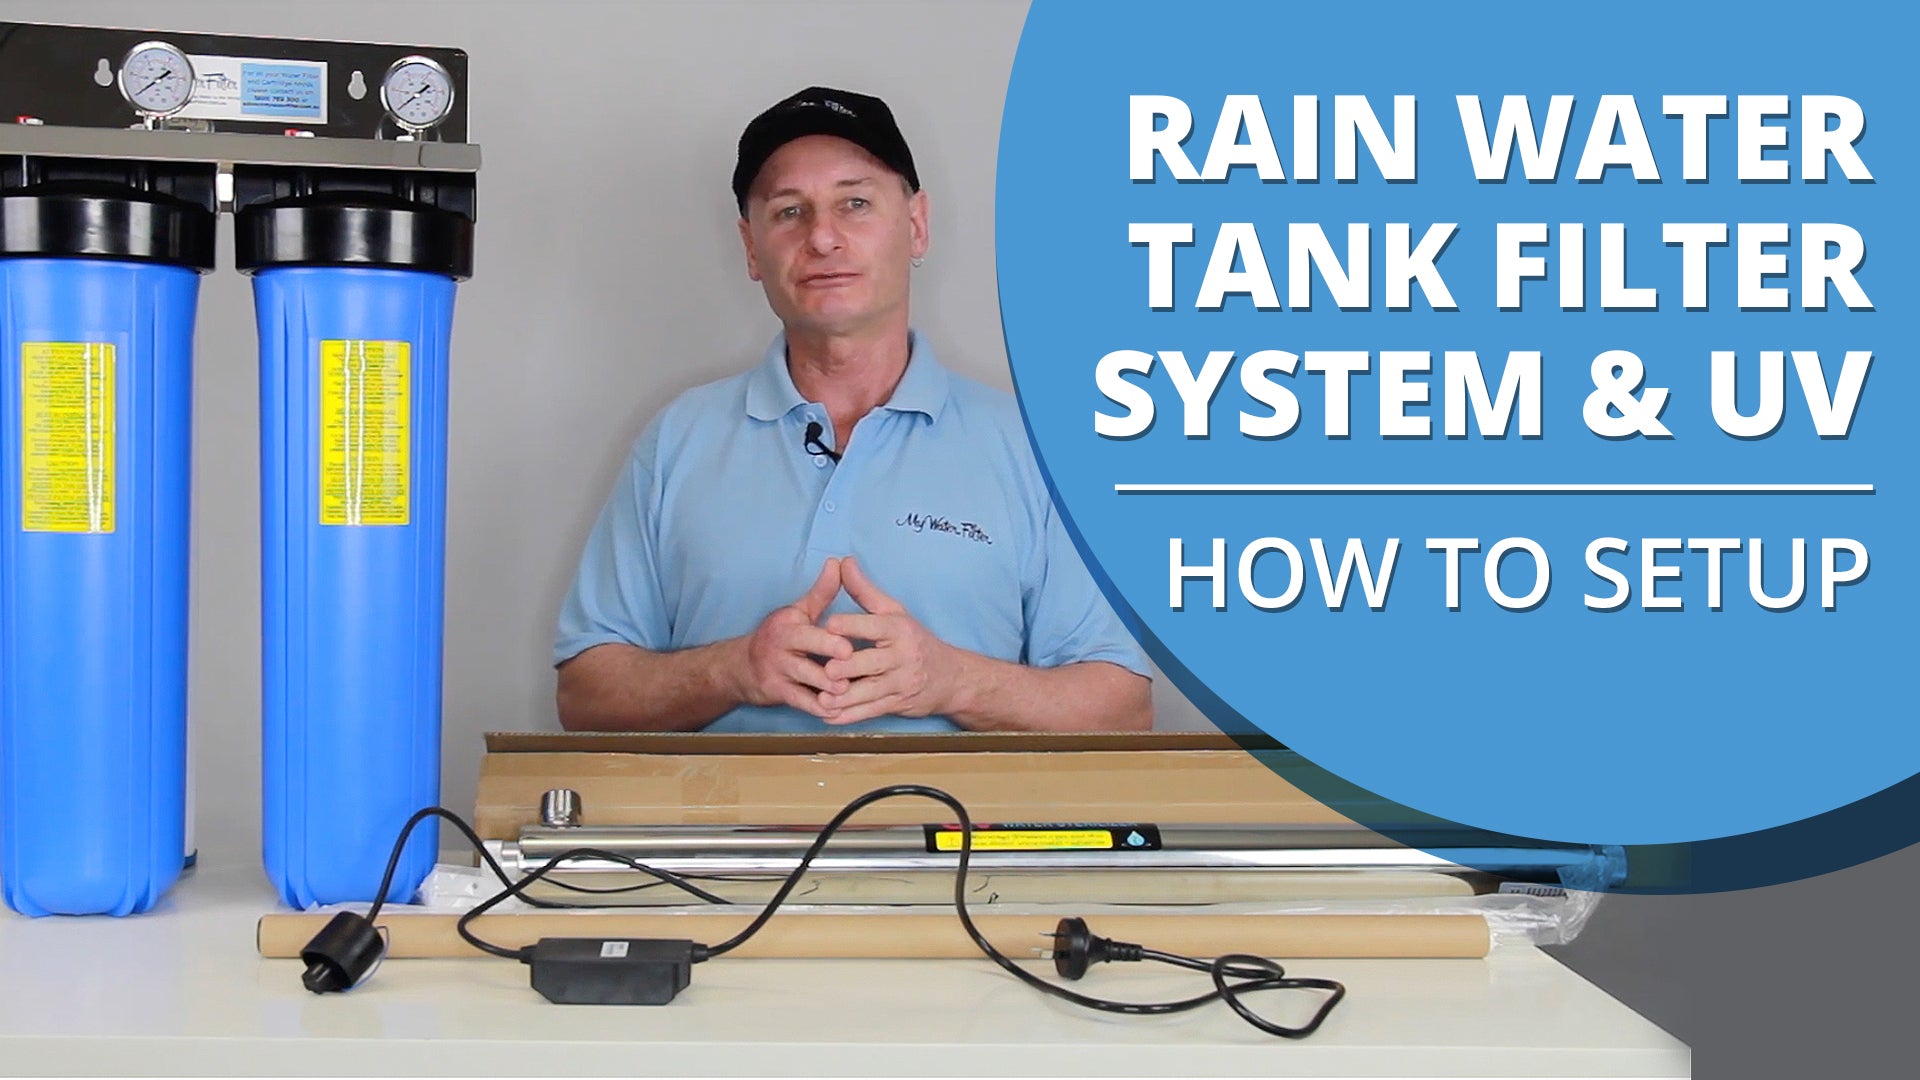 [VIDEO] Water Tank UV - How to Set Up Your Whole House Rain Water Tank Filter System with UV Light